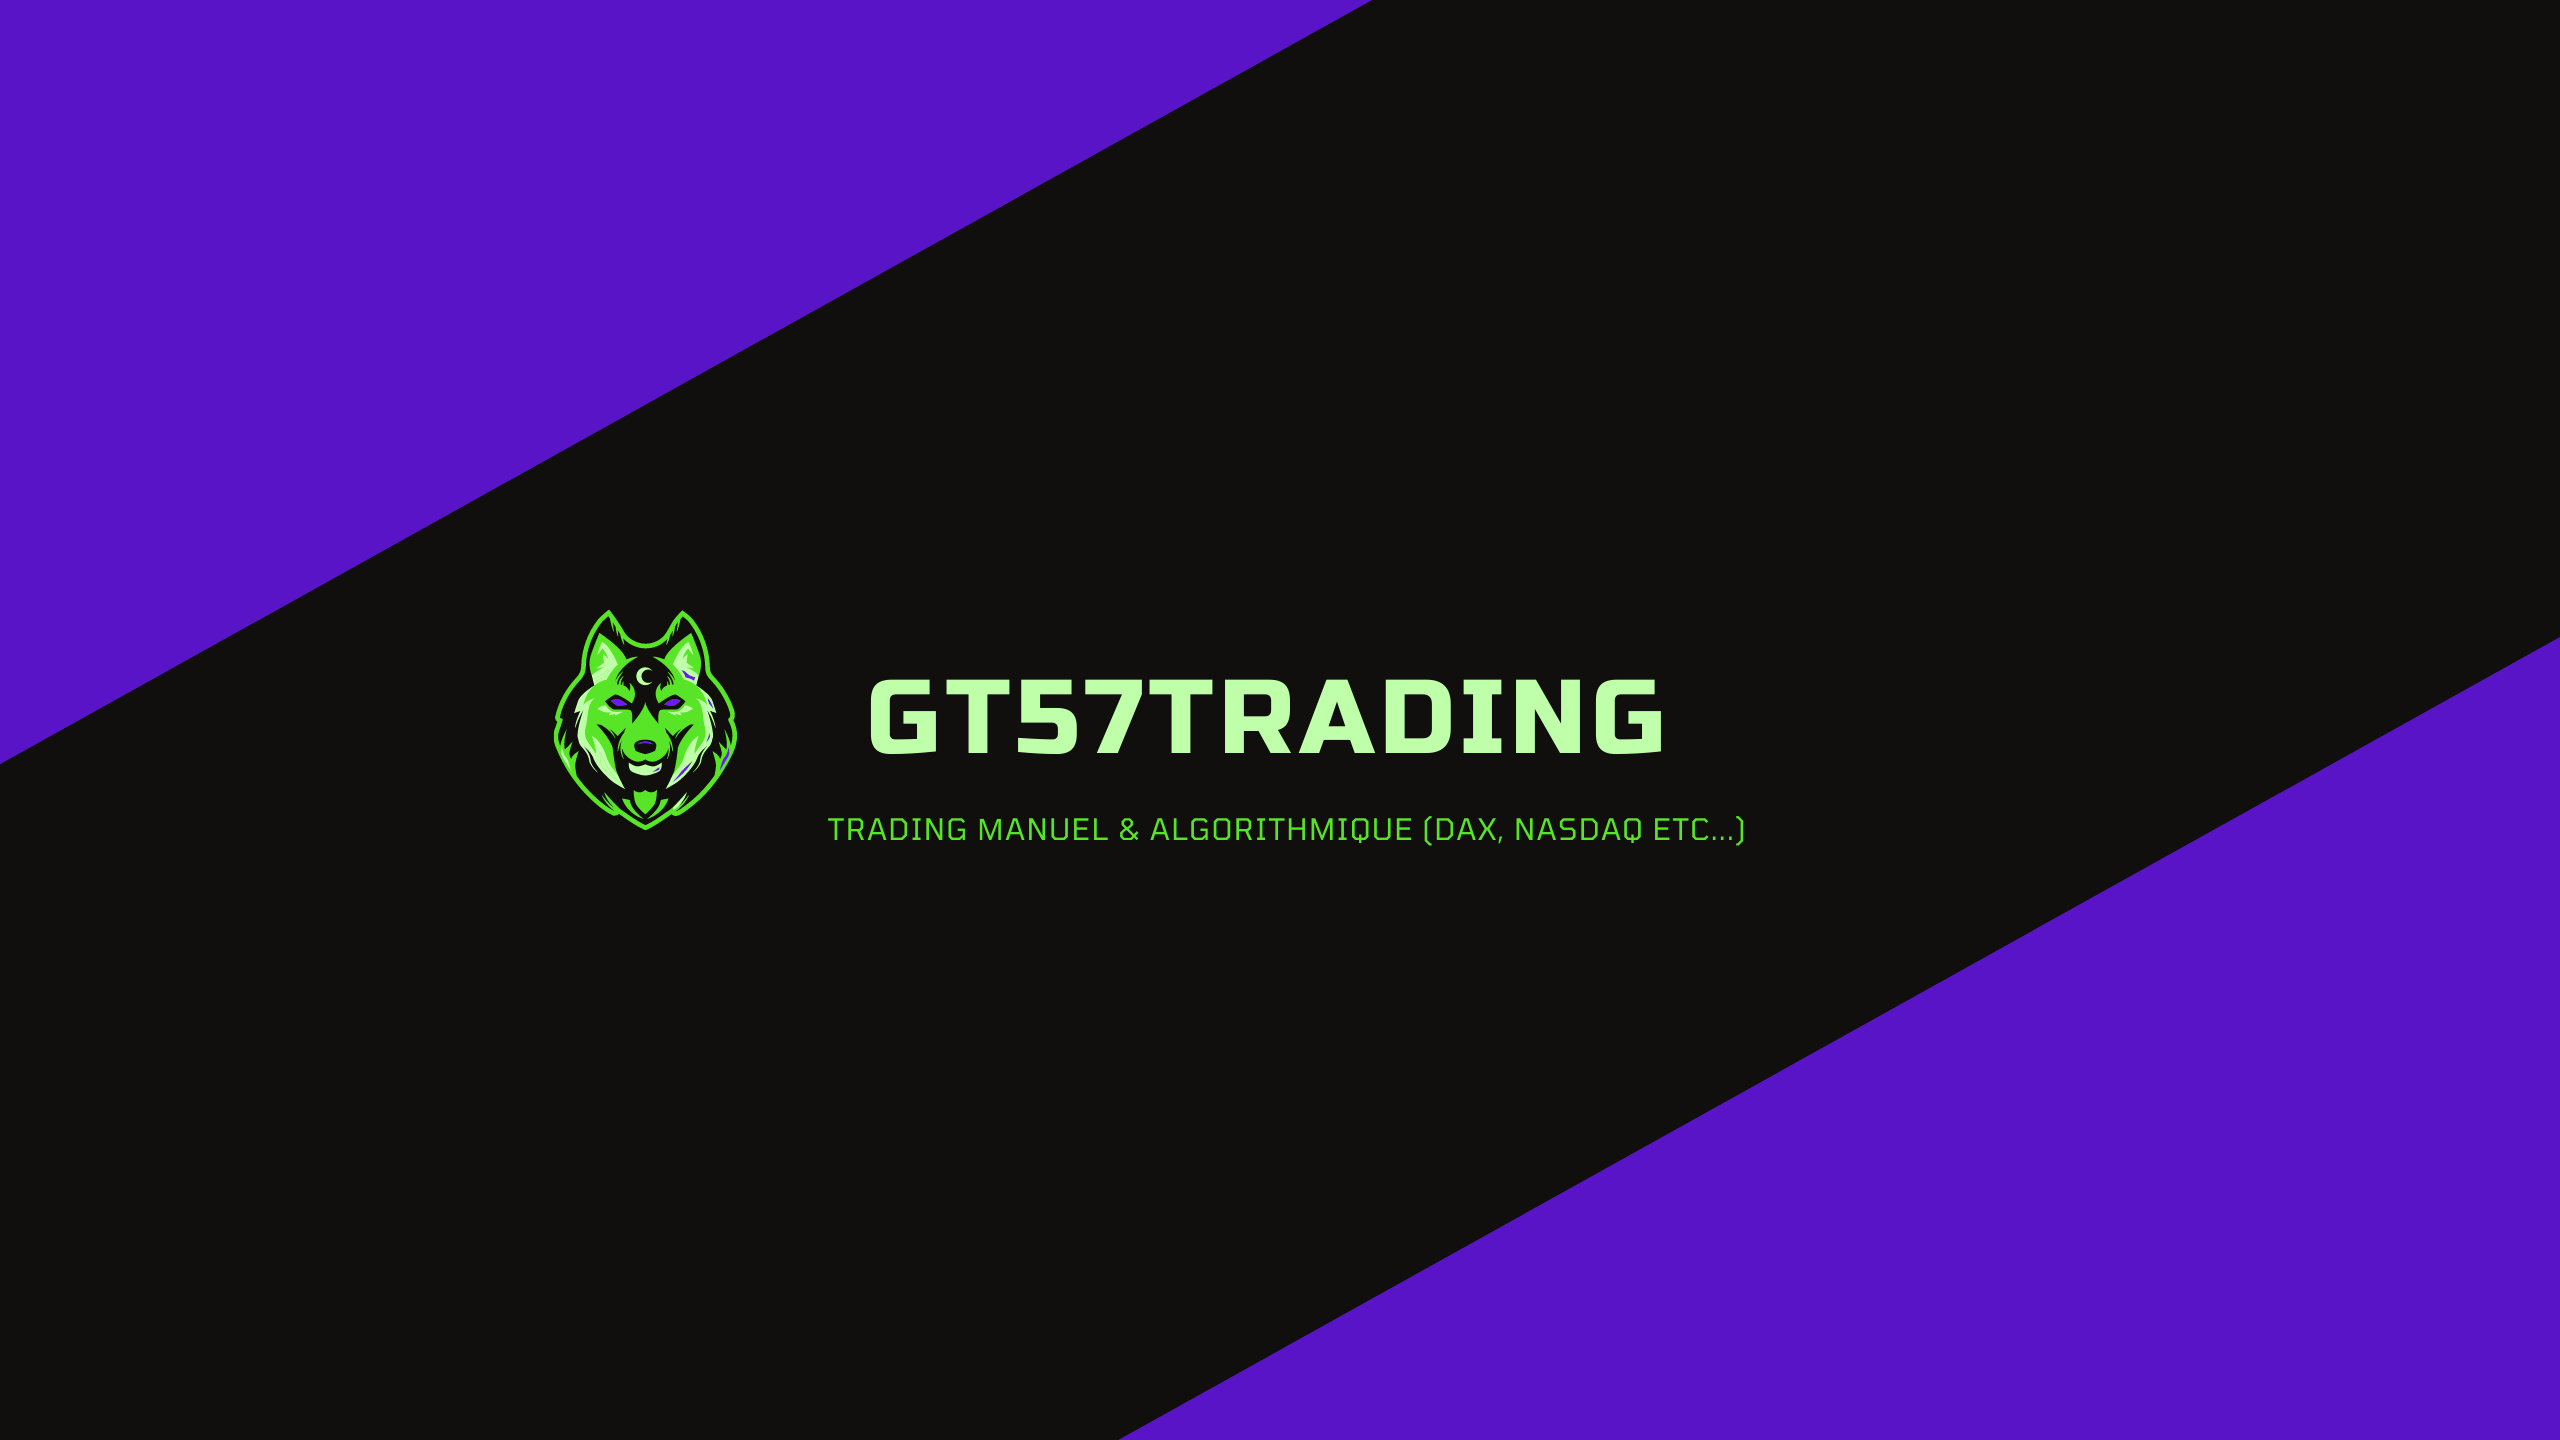 GT57TRADING